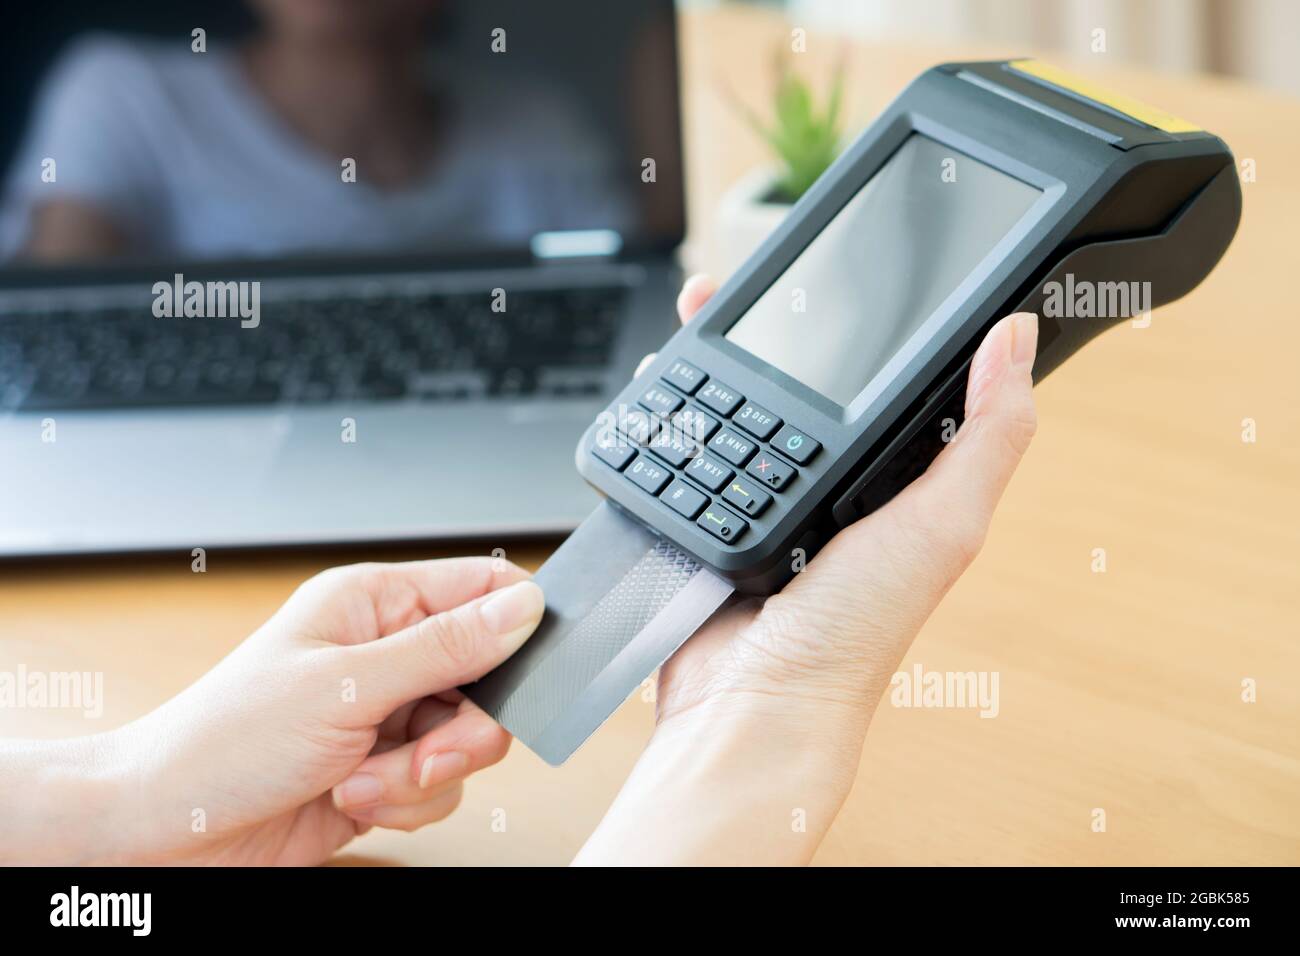 Contactless credit card payment Stock Photo